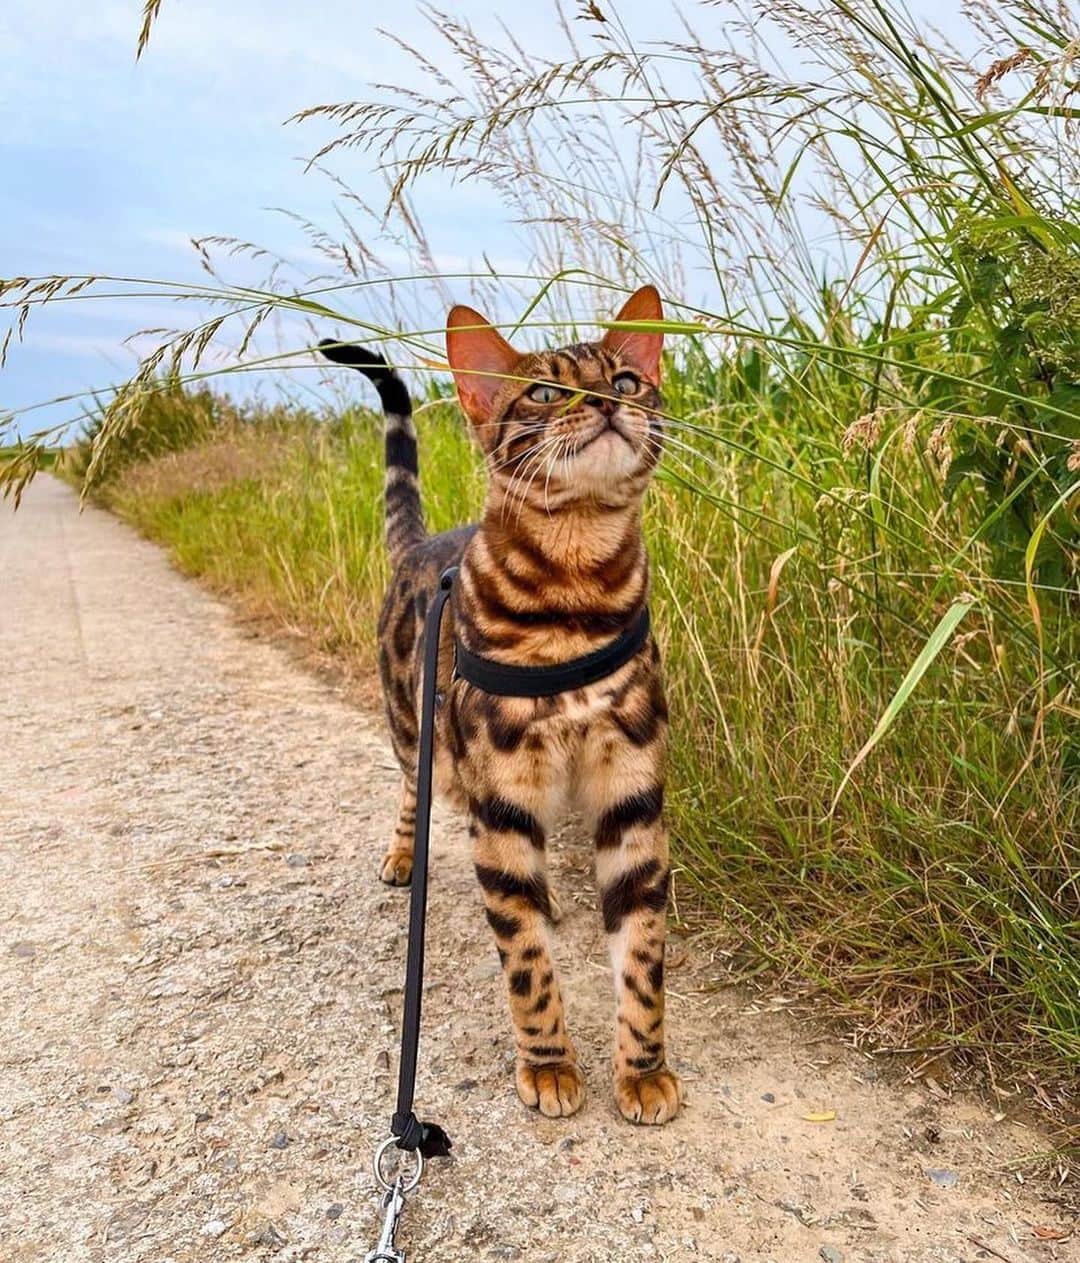 Bolt and Keelのインスタグラム：「Meet Vinnie! 🐾 This little kitty loves strolling around the world with his pawrents!🐈  @adventrapets ➡️ @vinnieecat  —————————————————— Follow @adventrapets to meet cute, brave and inspiring adventure pets from all over the world! 🌲🐶🐱🌲  • TAG US IN YOUR POSTS to get your little adventurer featured! #adventrapets ——————————————————」